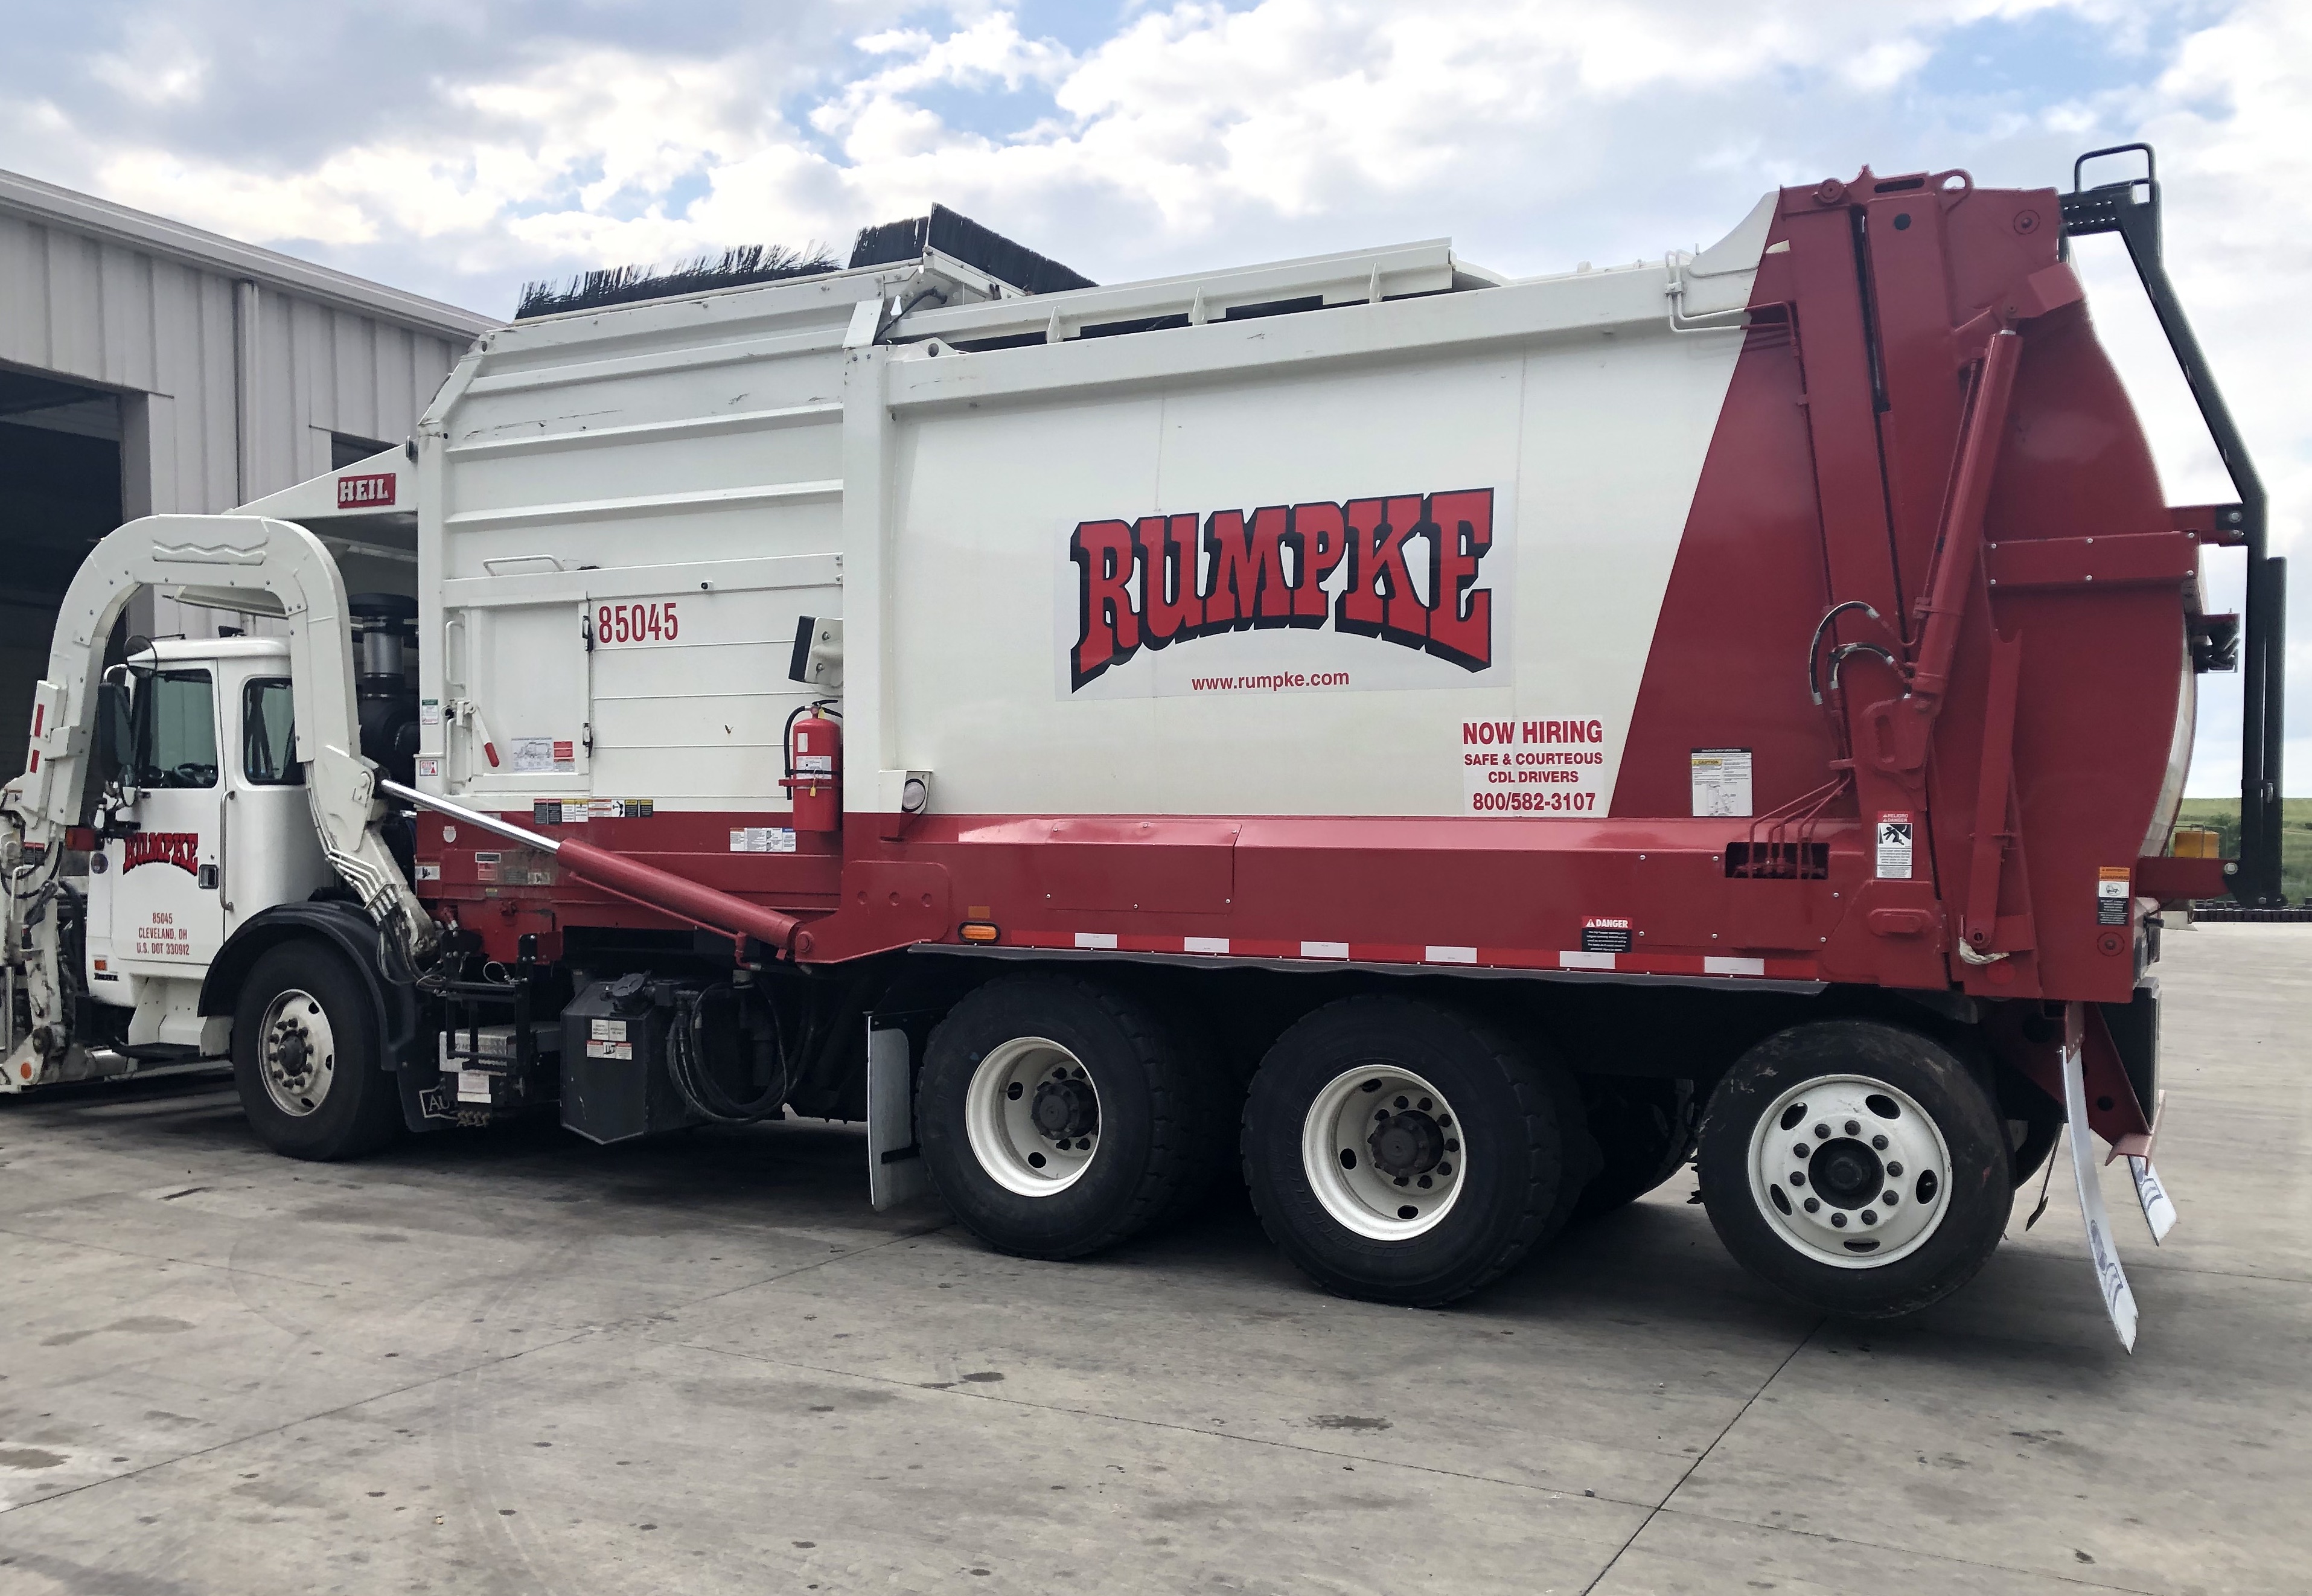 Parma Bulk Pickup Calendar 2022 Parma Seeing Smooth Transition To New Waste And Recycling Hauler -  Cleveland.com